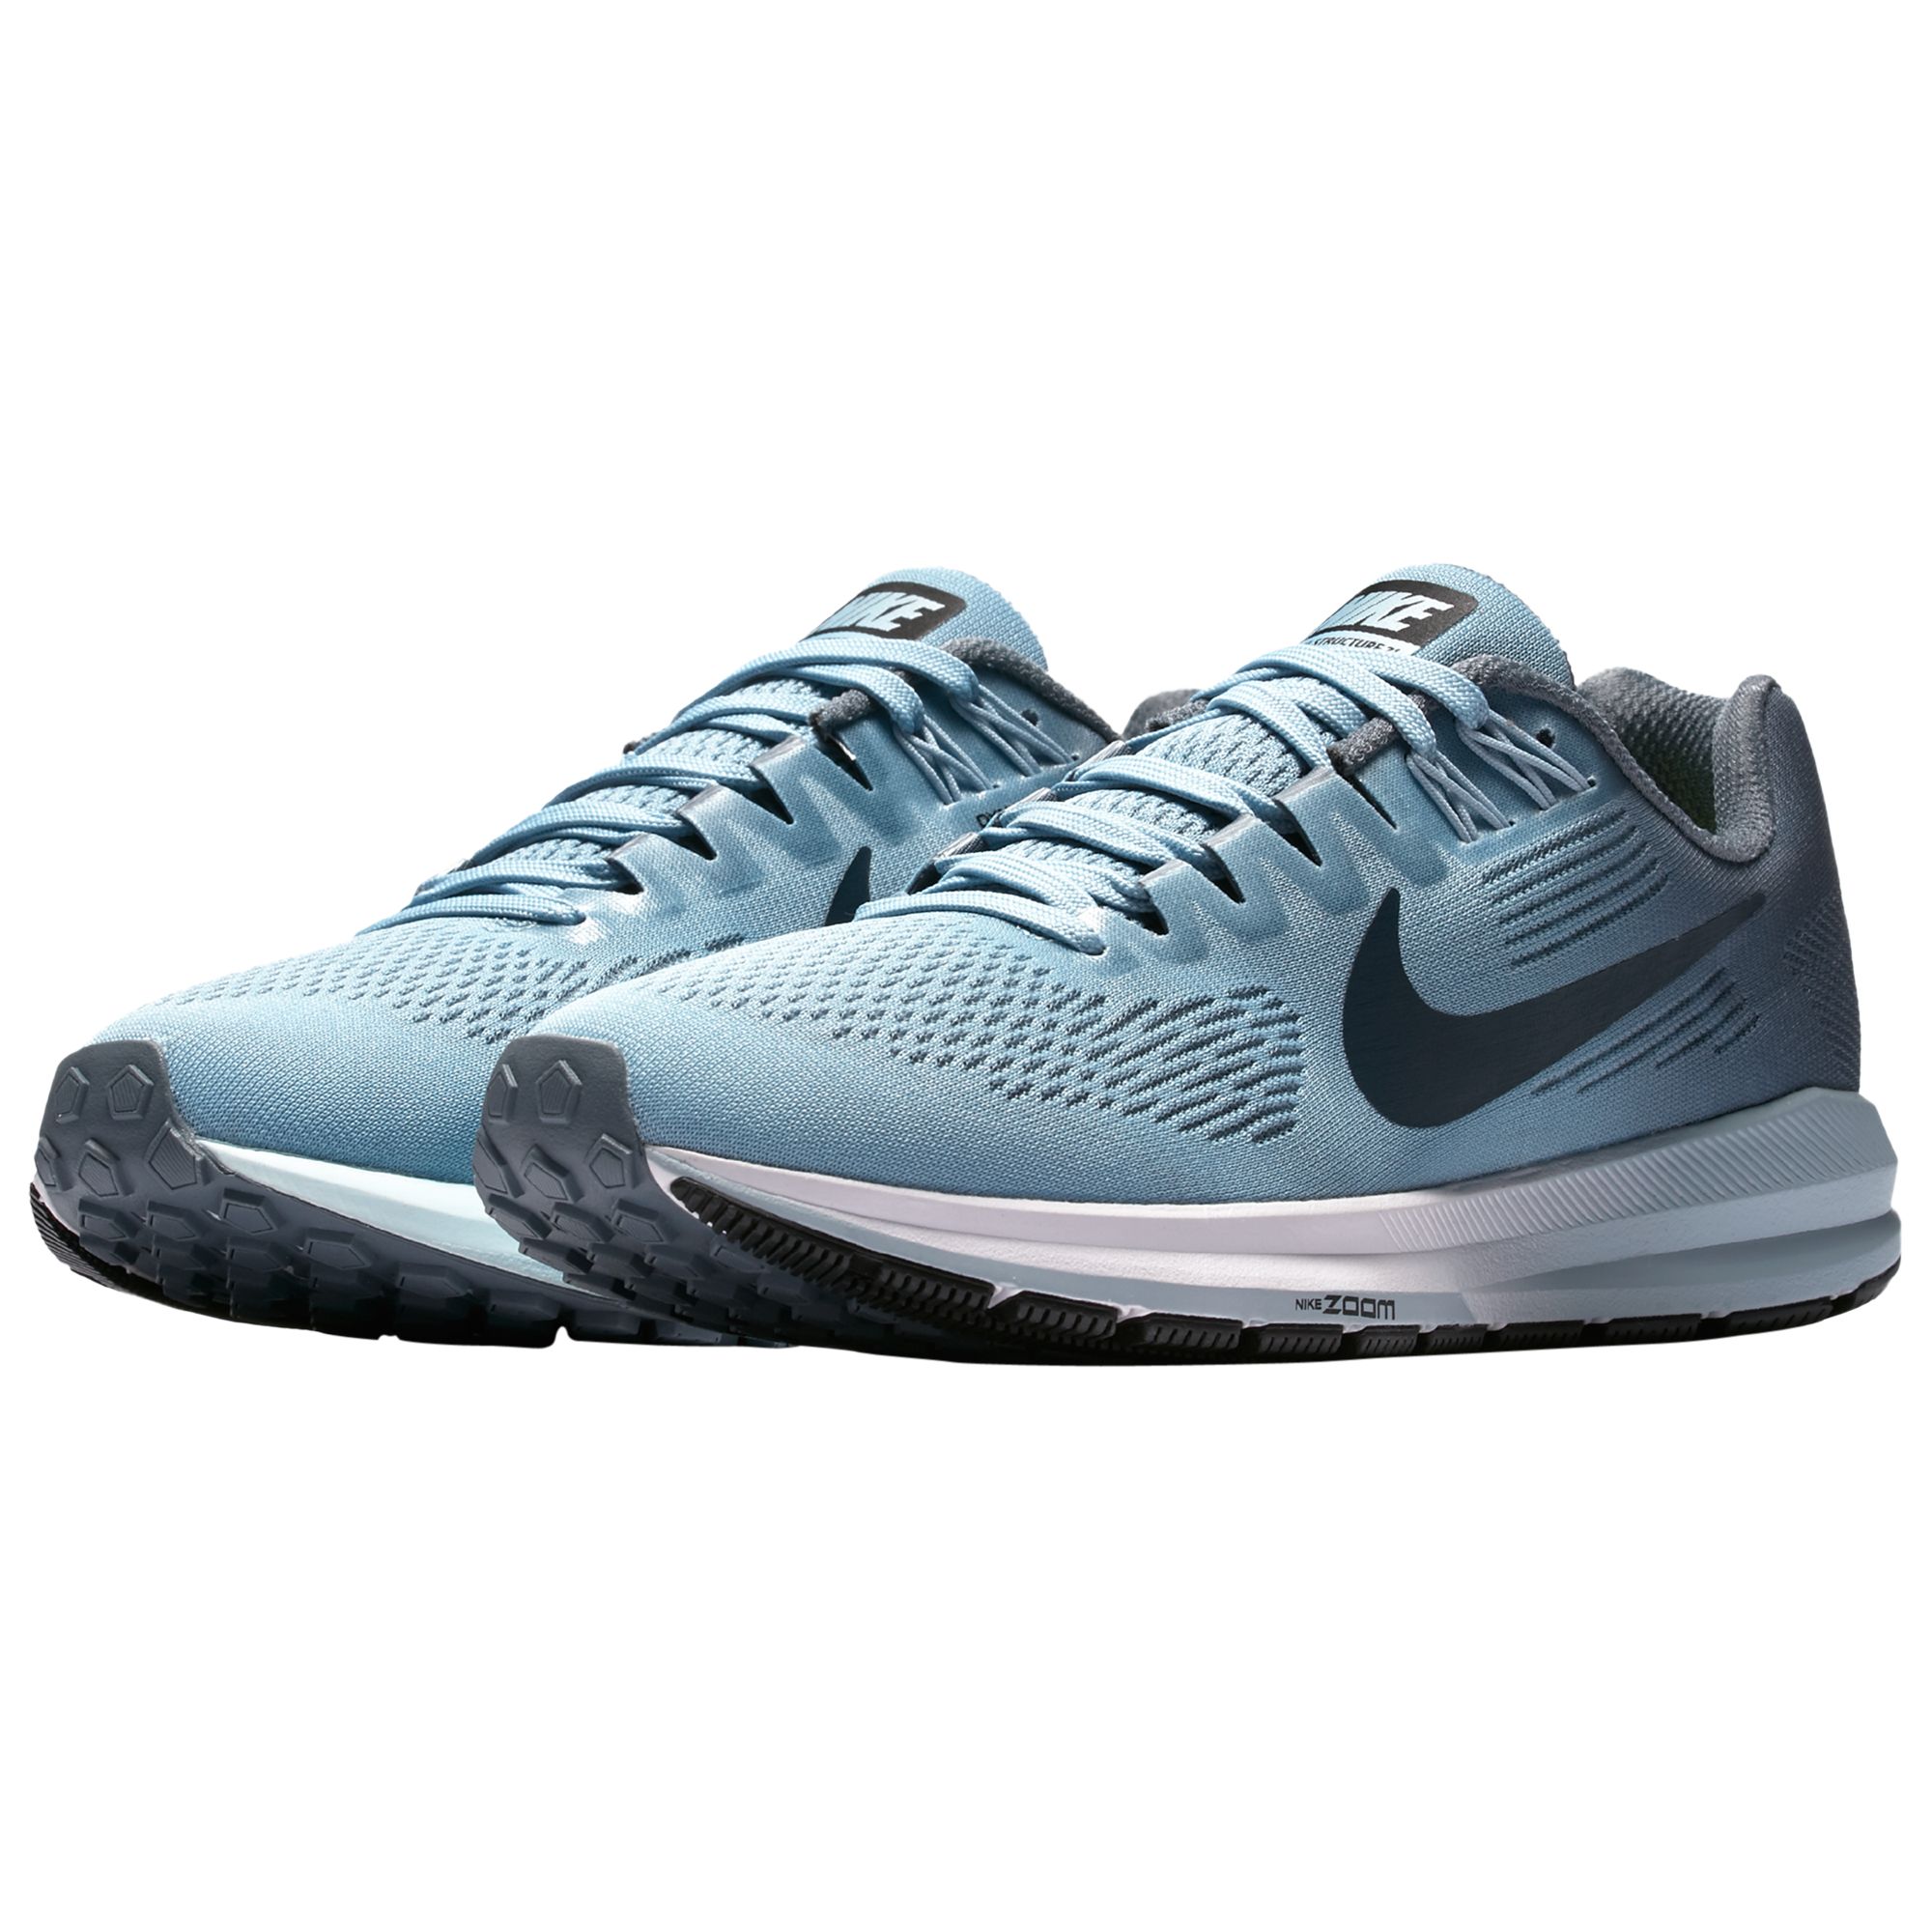 nike air structure 21 women's